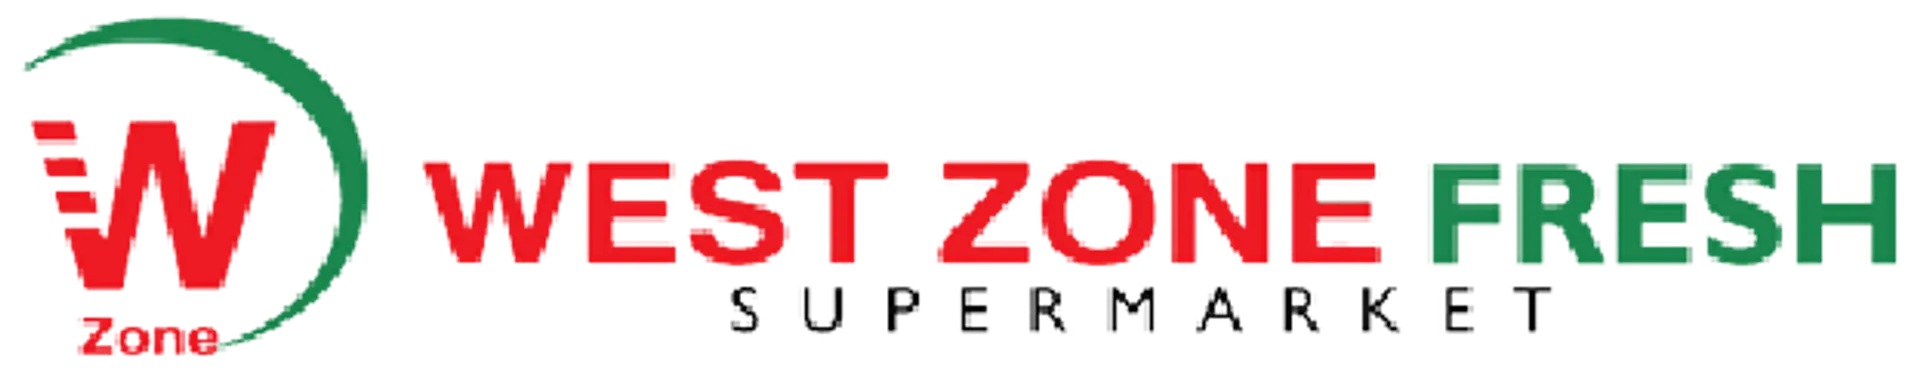 WEST ZONE SUPERMARKET logo. Current weekly ad